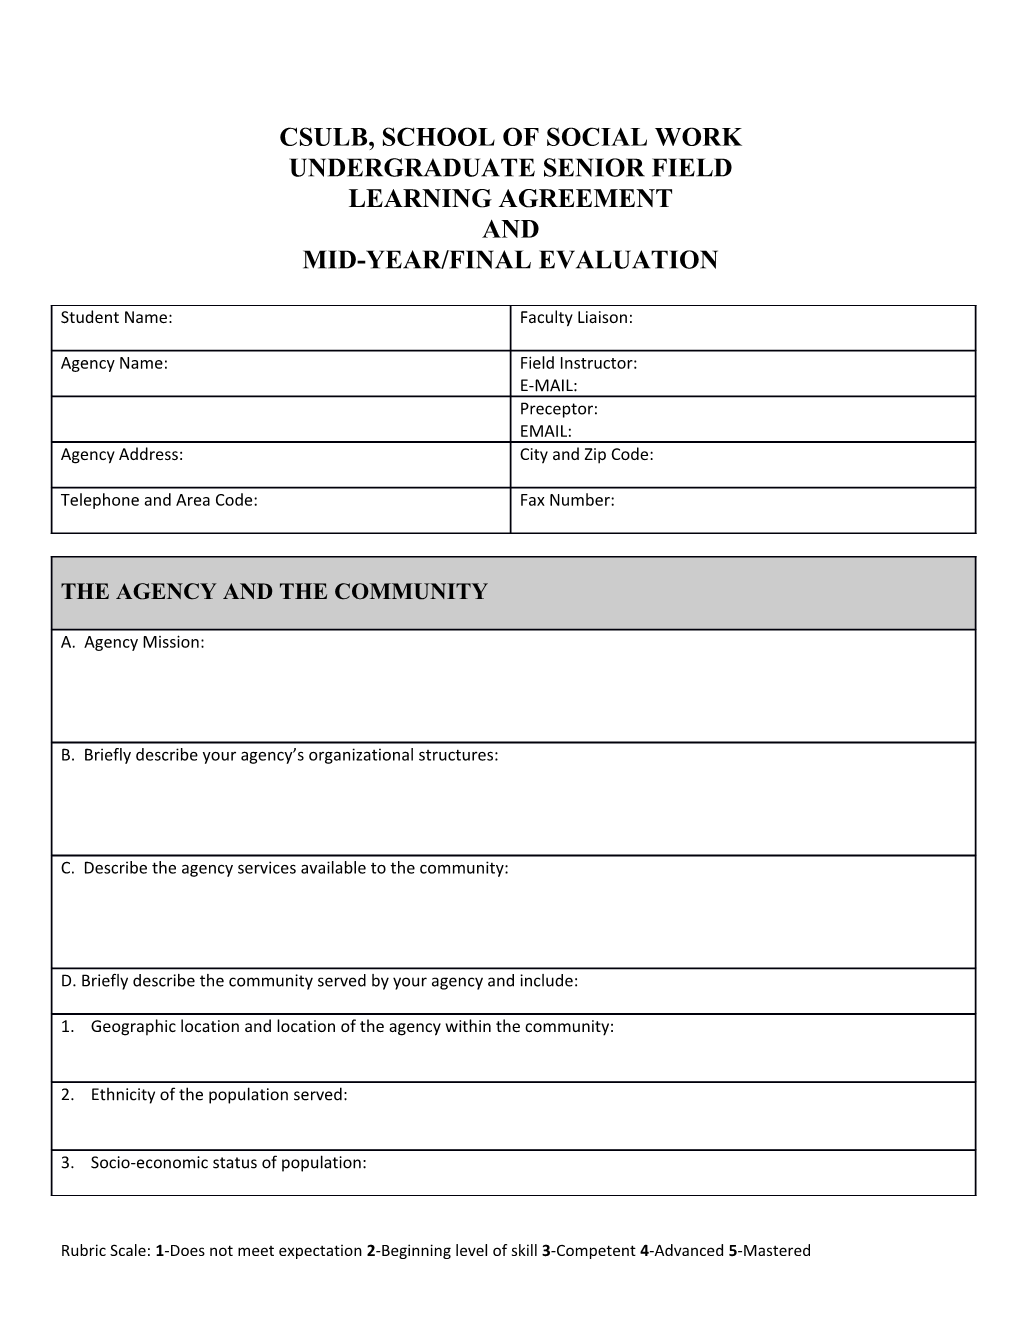 Learning Agreement Instructions: the Shaded Area Under Each Competency Is the Learning